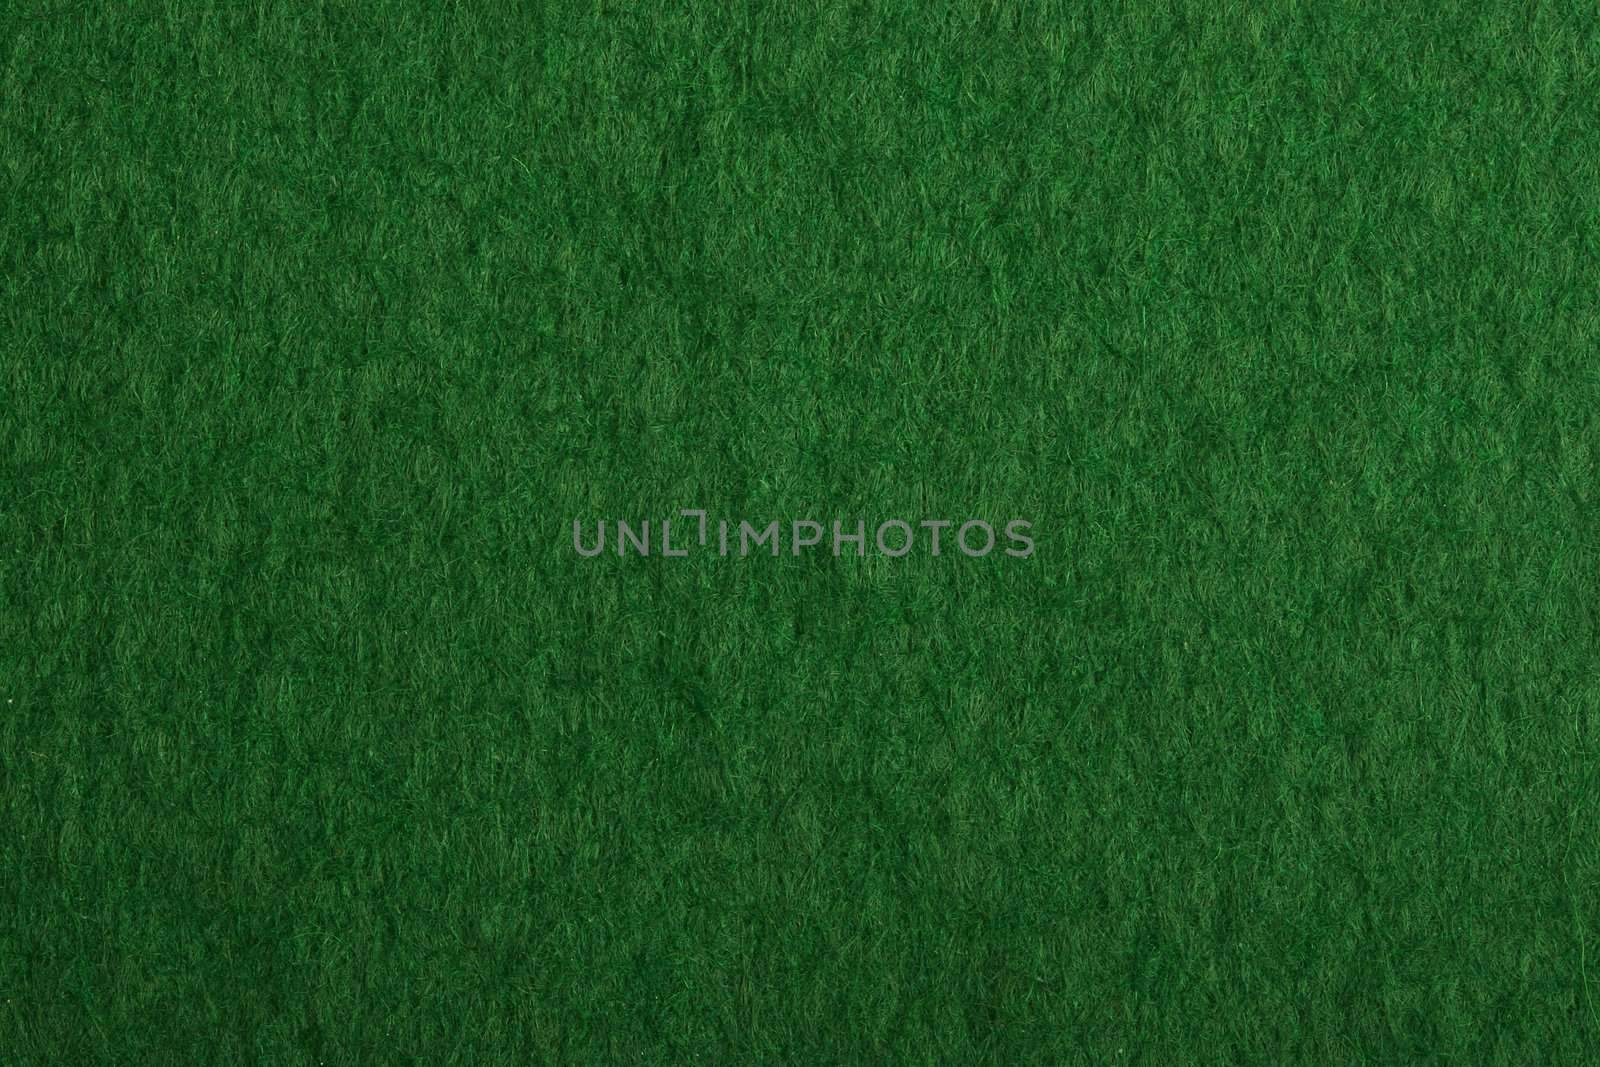 Close-up of a green poker table felt surface